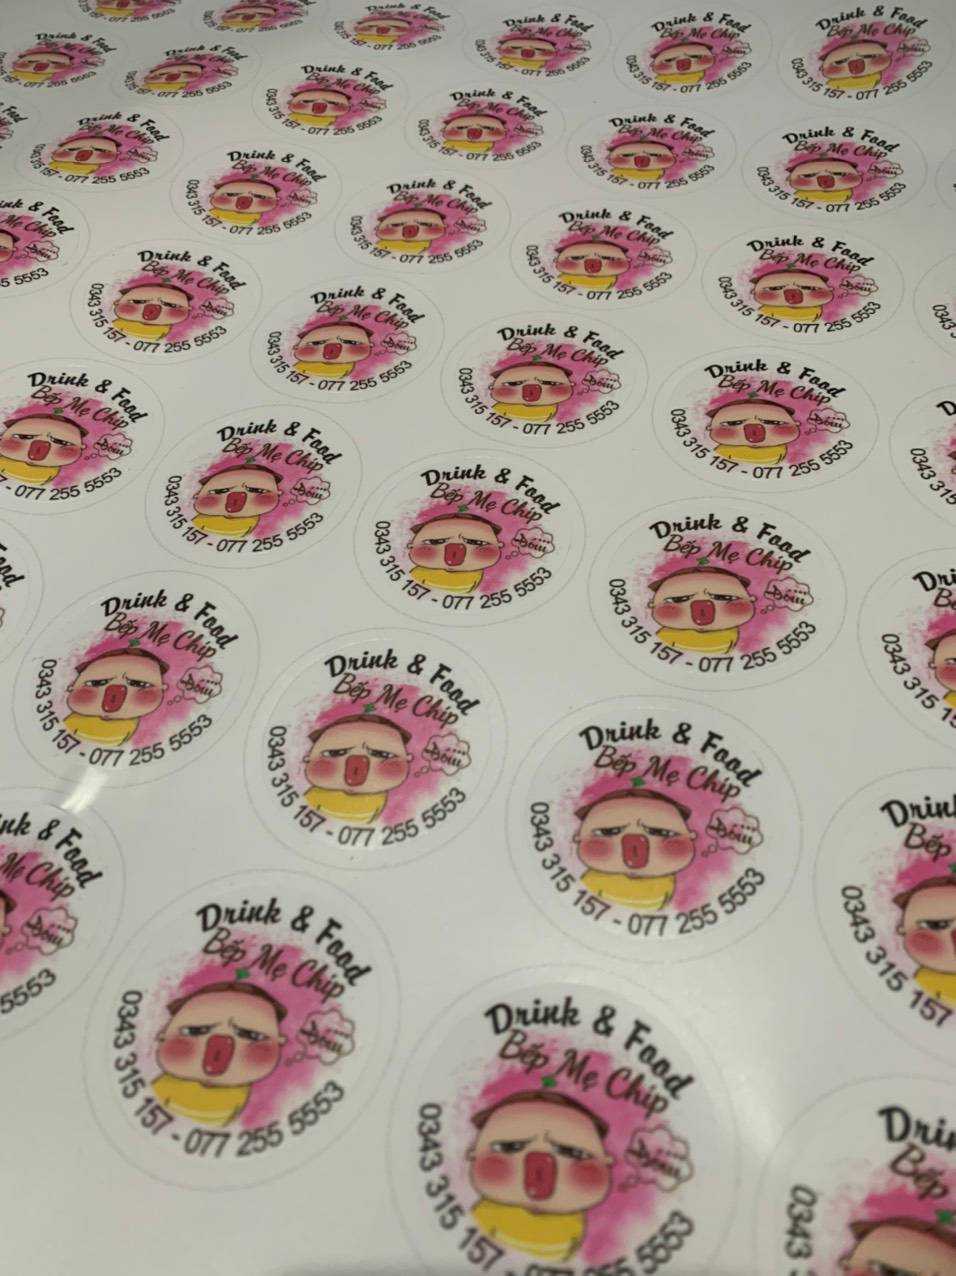 In decal dán Bếp Mẹ Chip